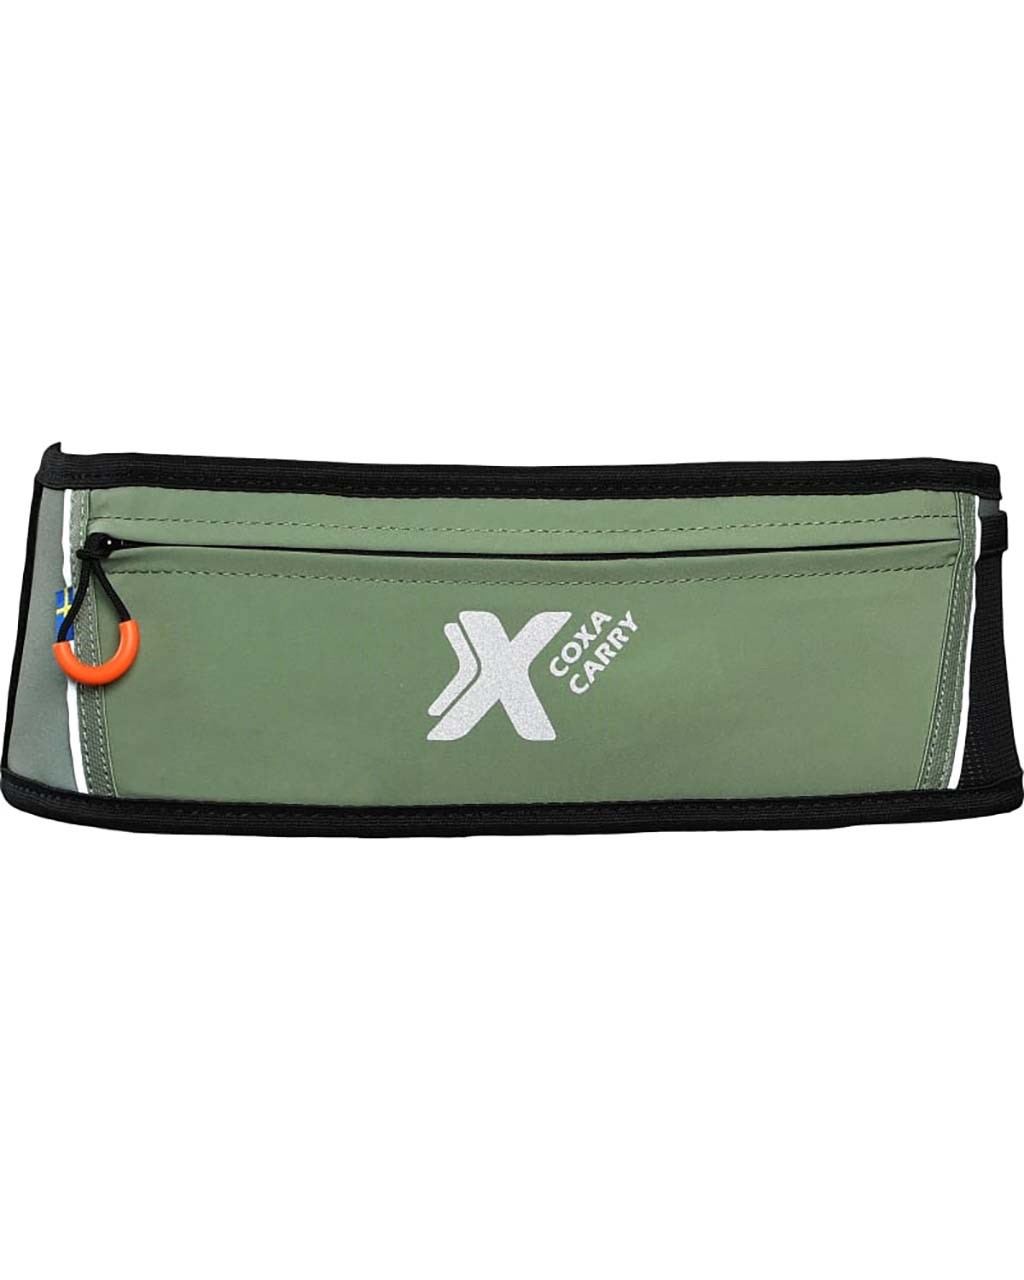 Coxa Carry WB1 Running Olive